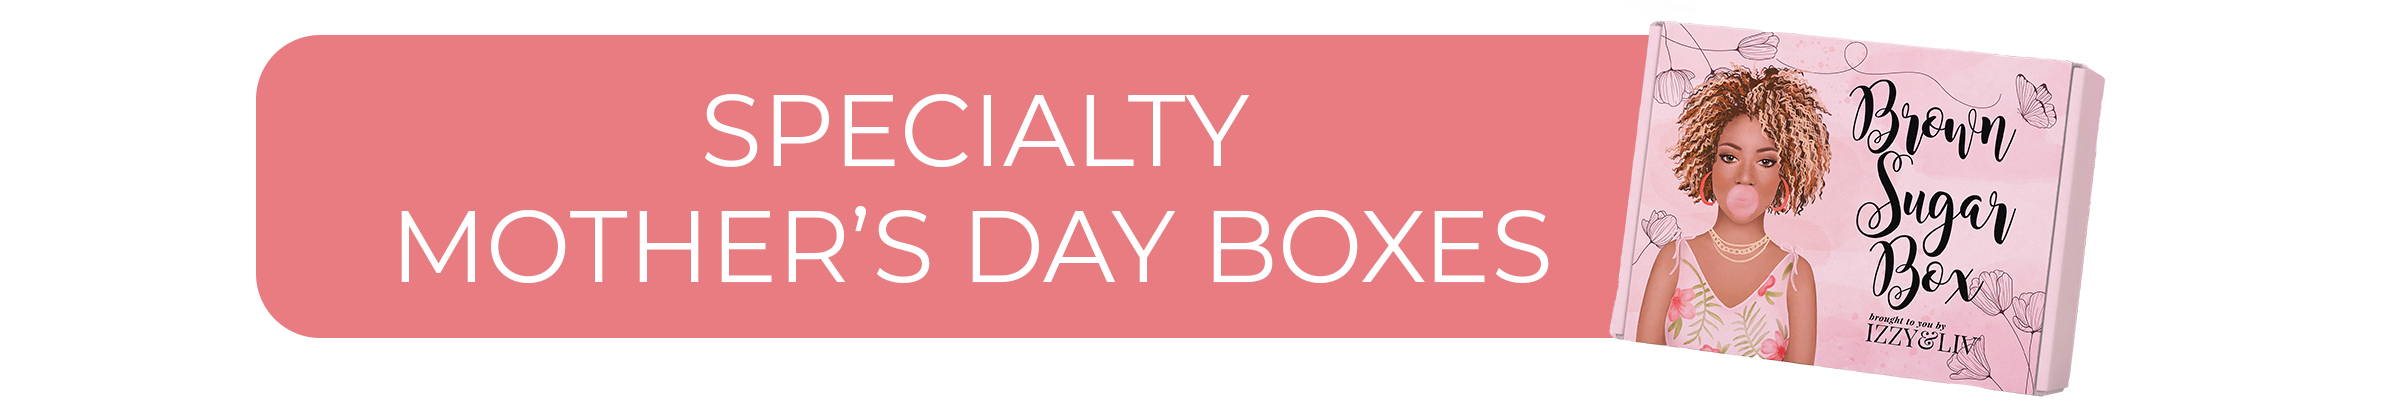 Specialty Mother's Day Boxes - Header